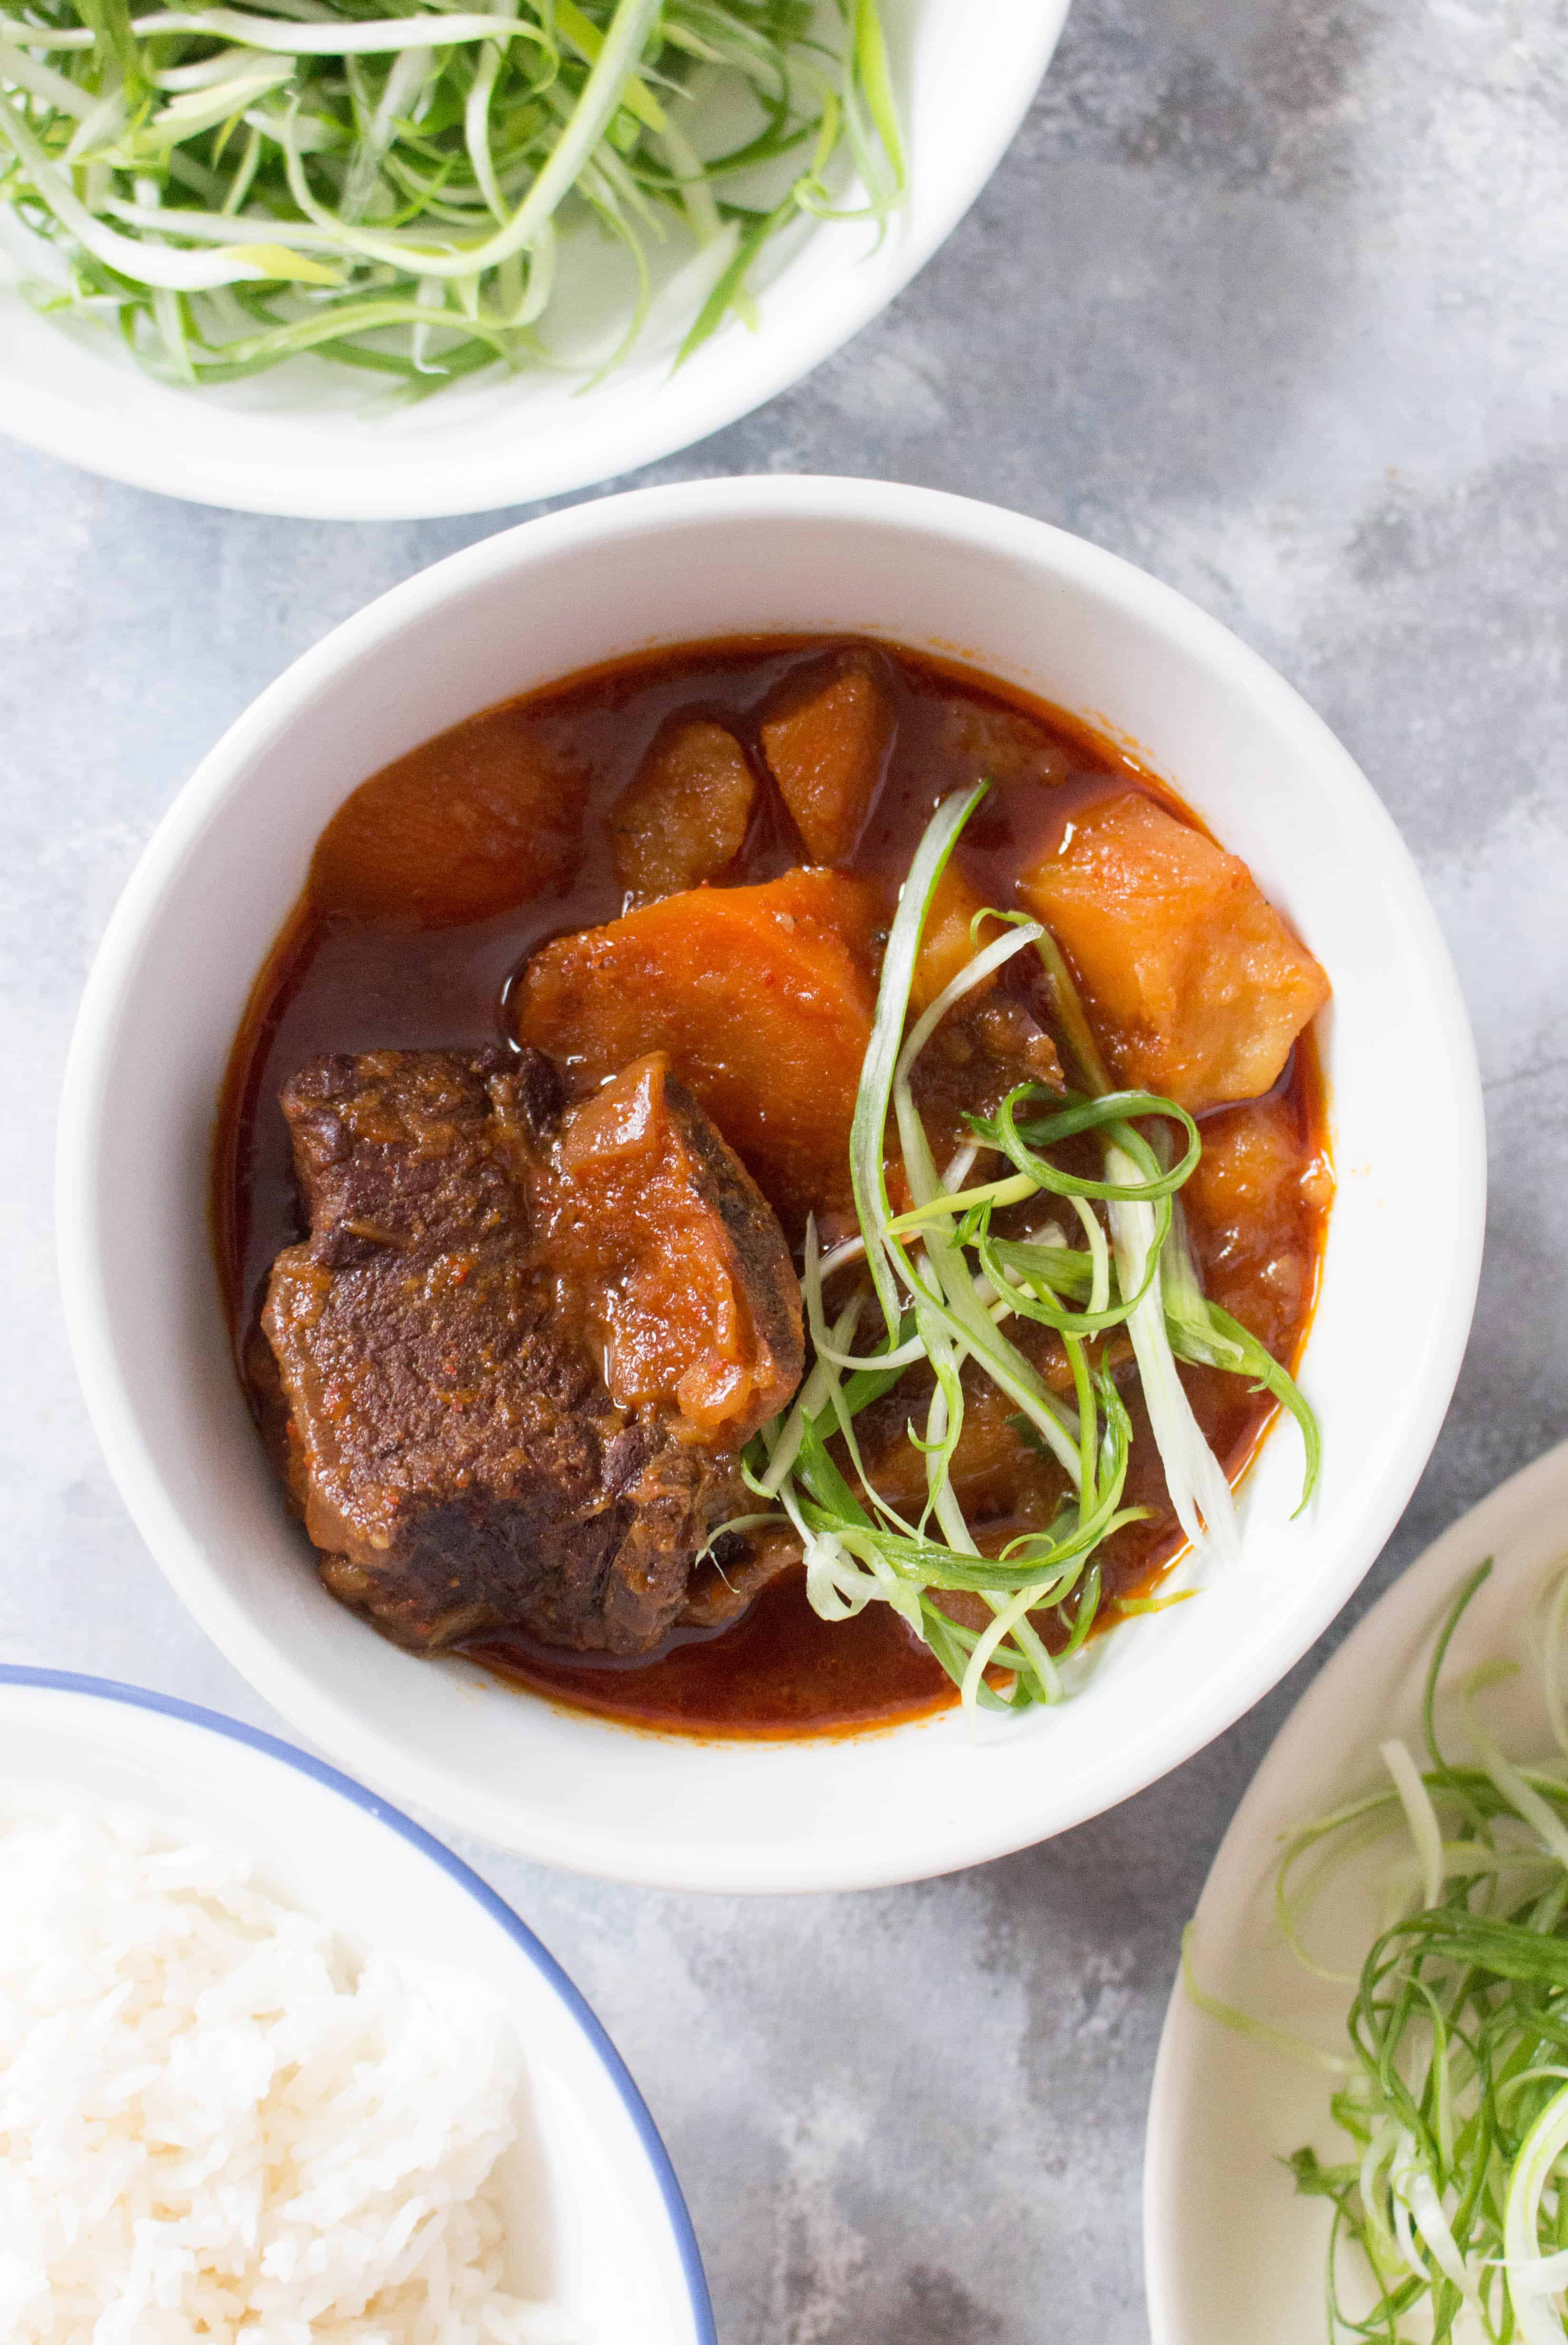 These spicy sweet but savoury Korean Instant Pot Beef Short Ribs are going to knock your socks off. It's such a cozy meal that you're going to want to make this again and again all winter.